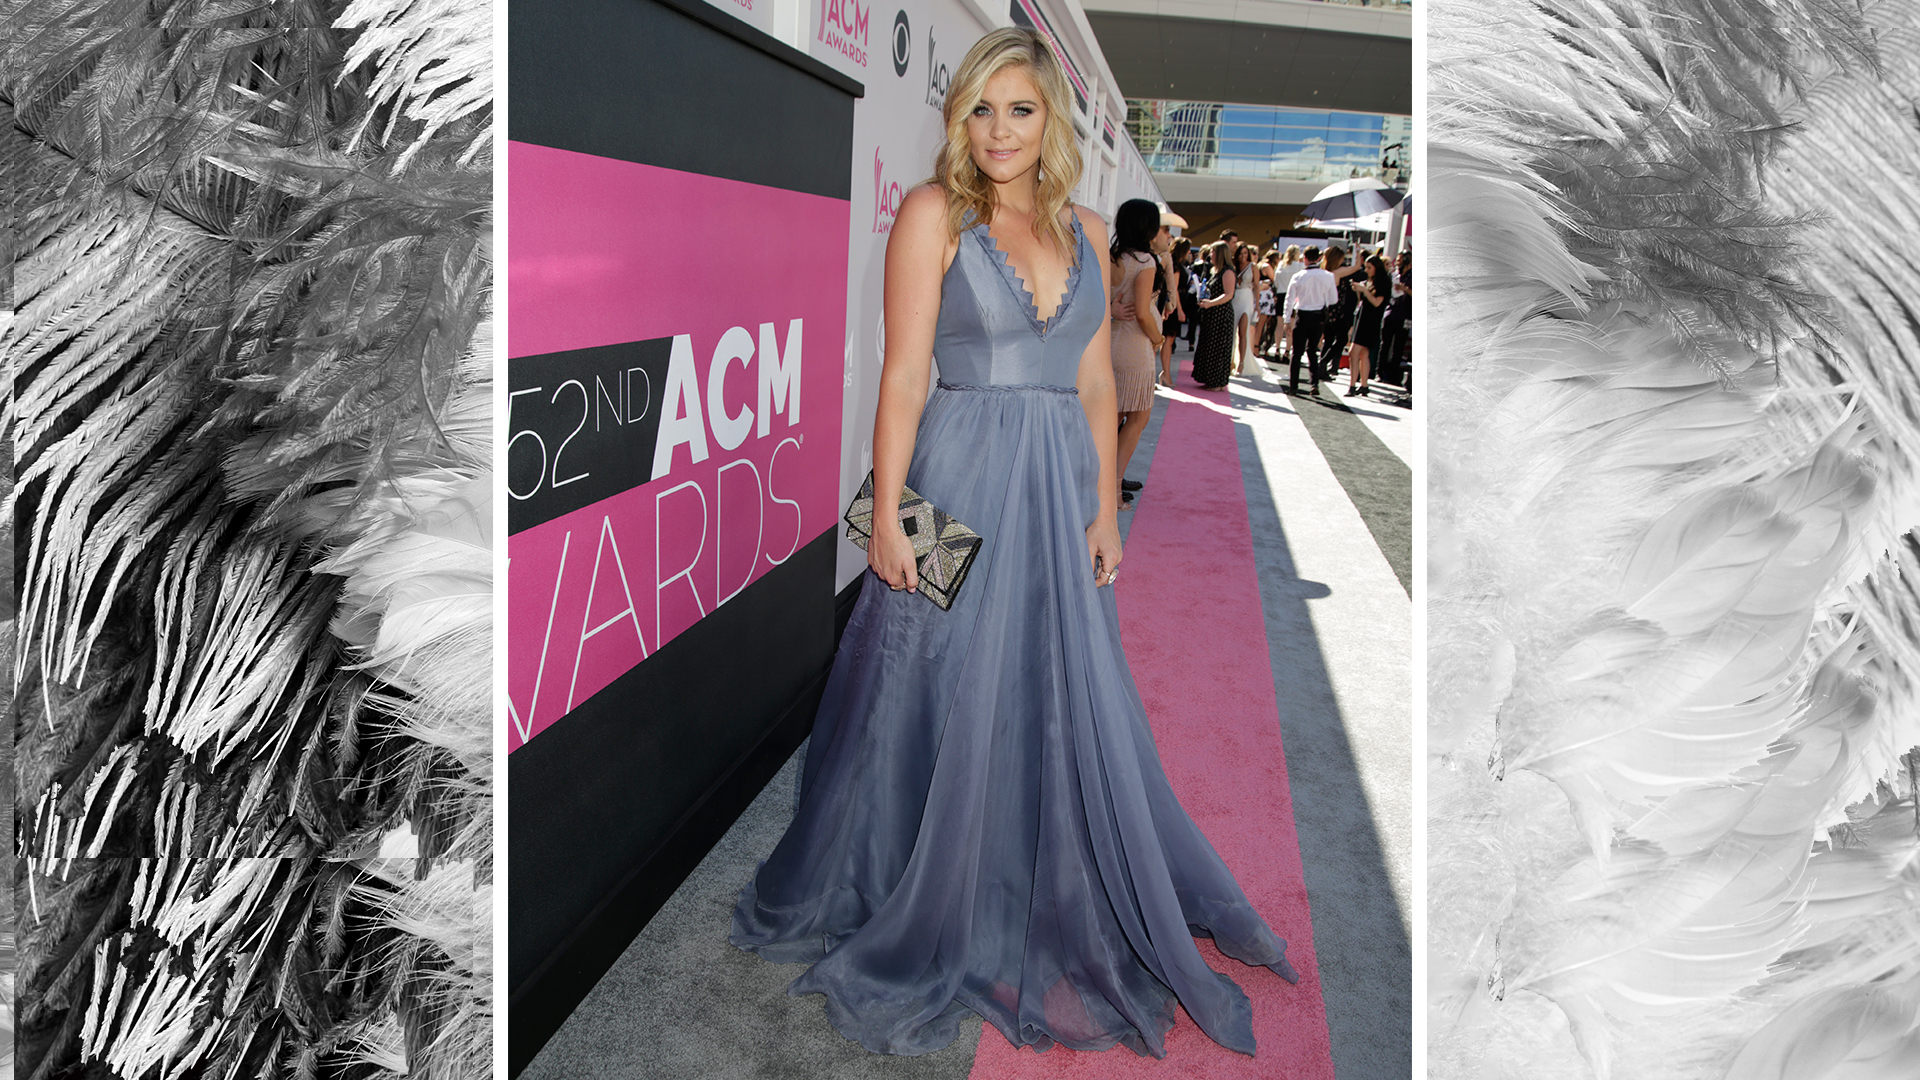 Lauren Alaina is a fairytale come true in a floor-length periwinkle gown.